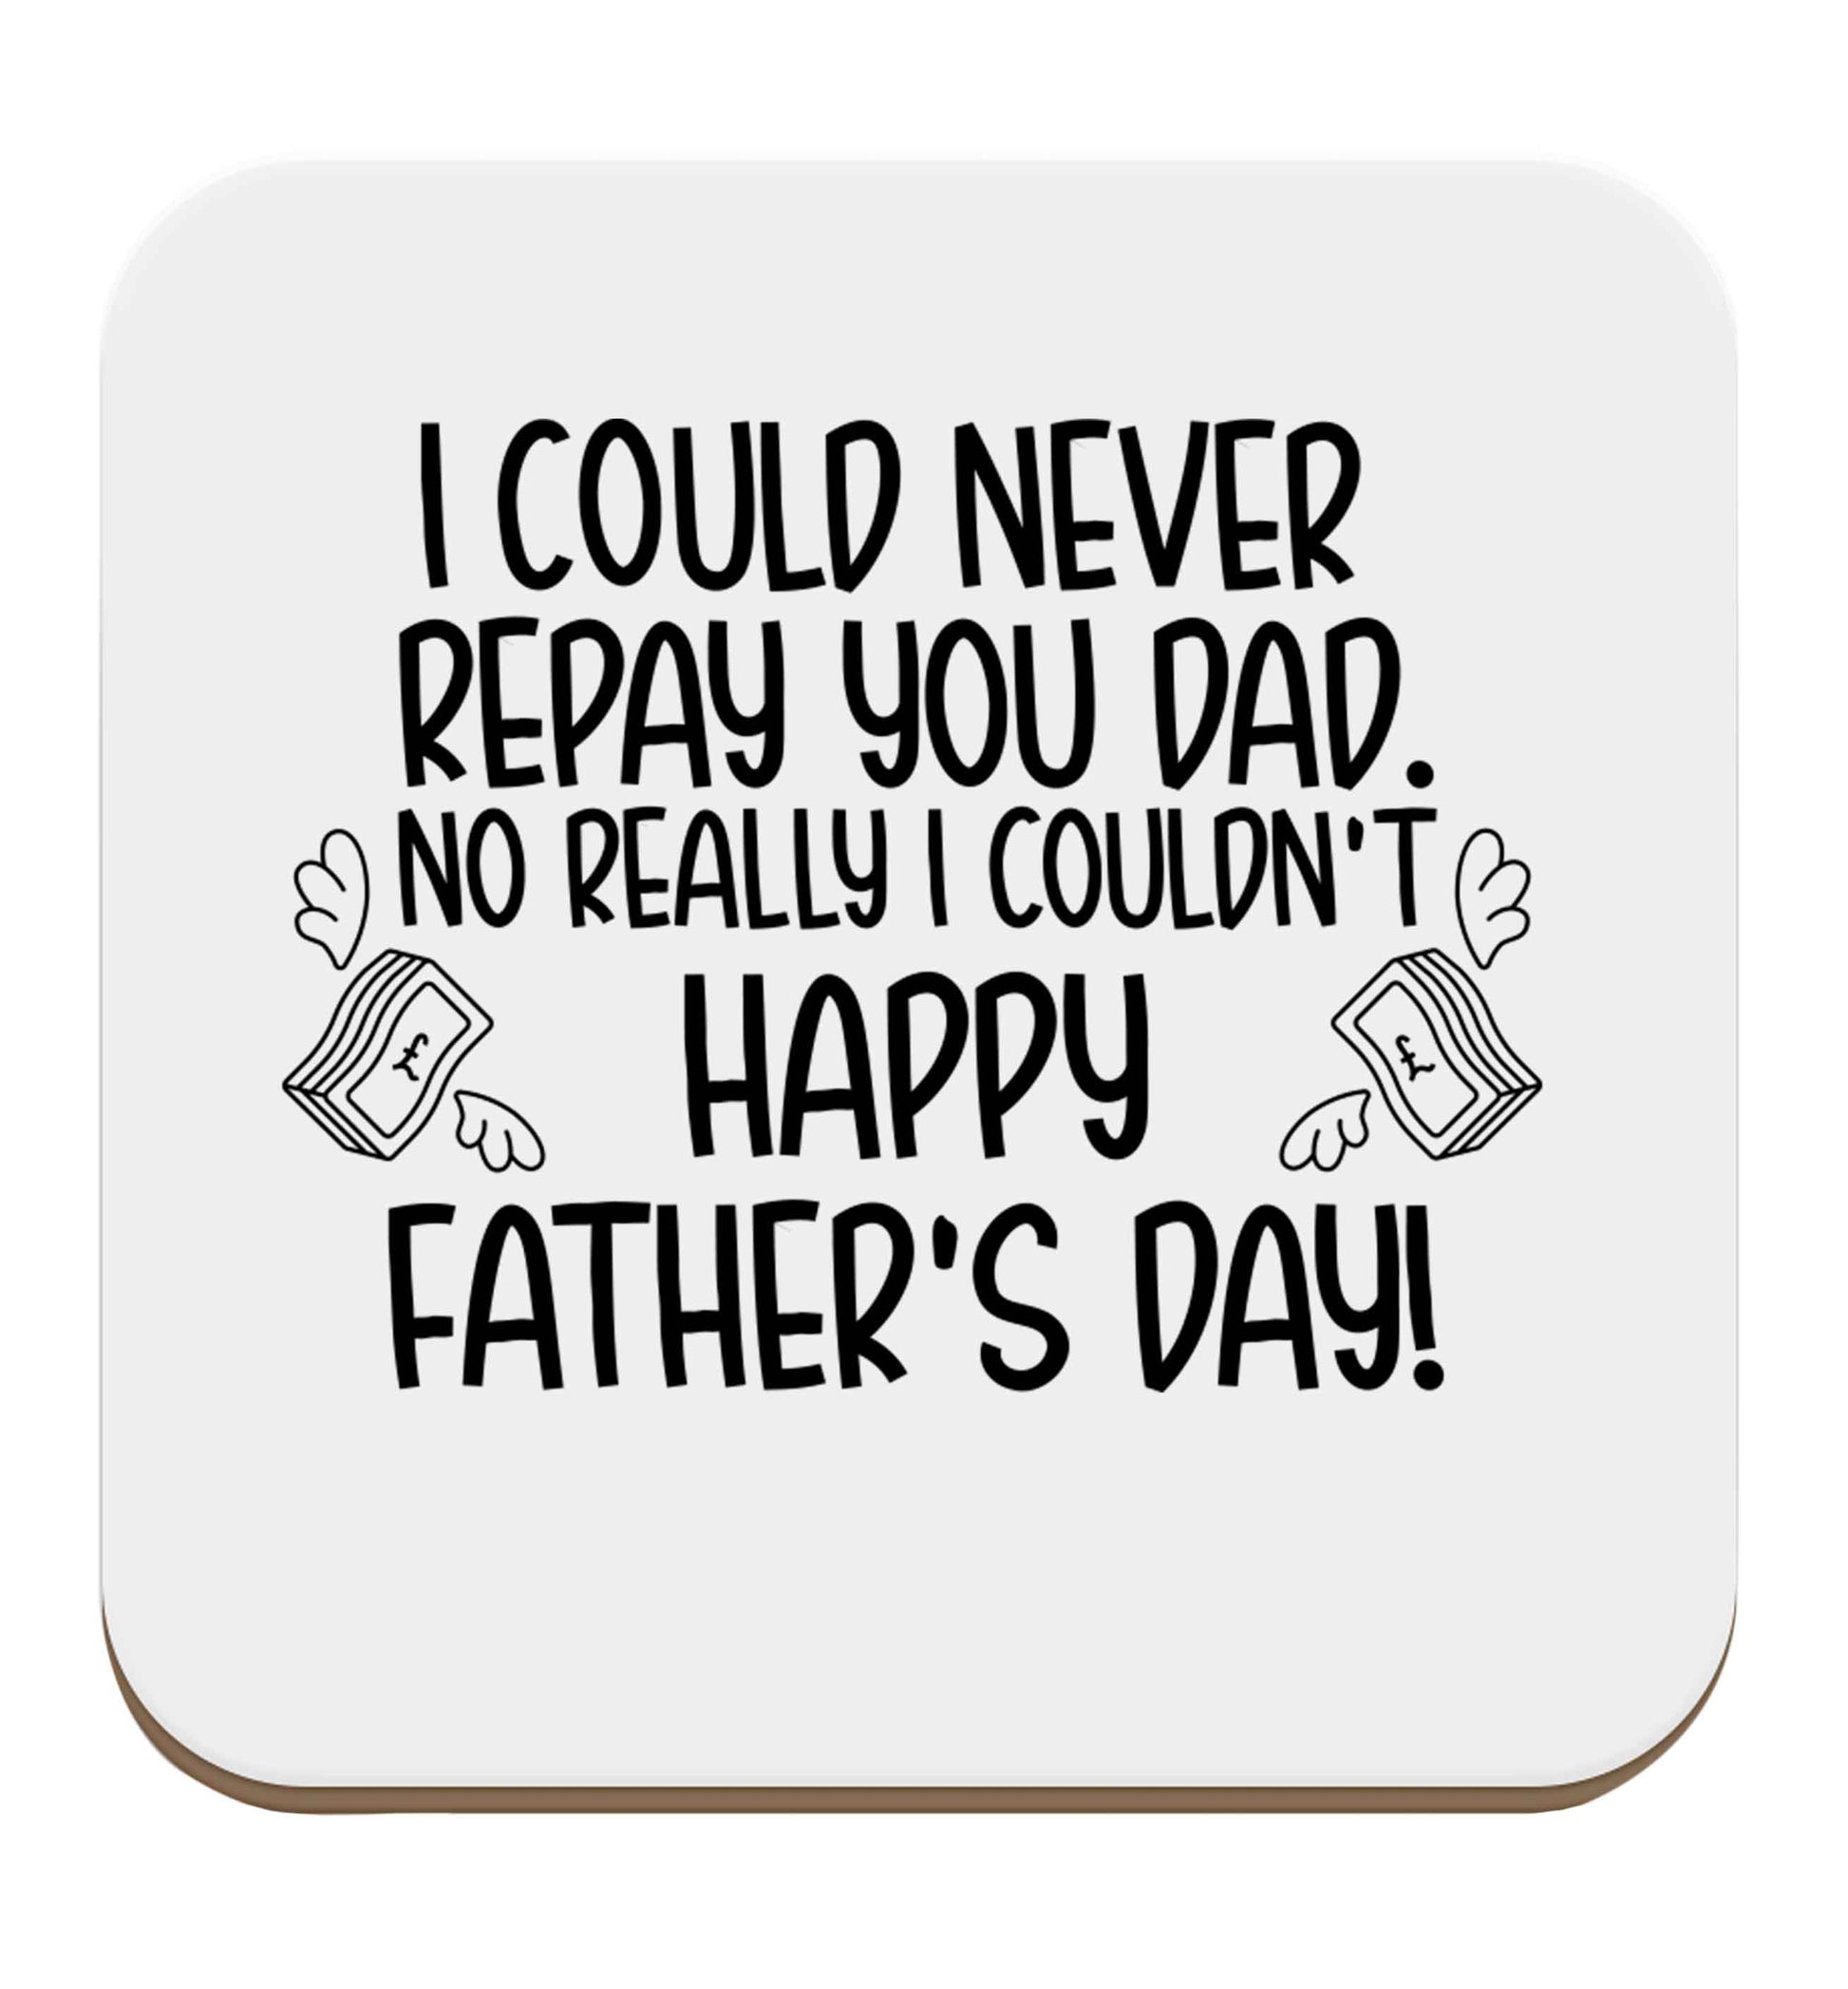 I could never repay you dad. No I really couldn't happy Father's day! set of four coasters